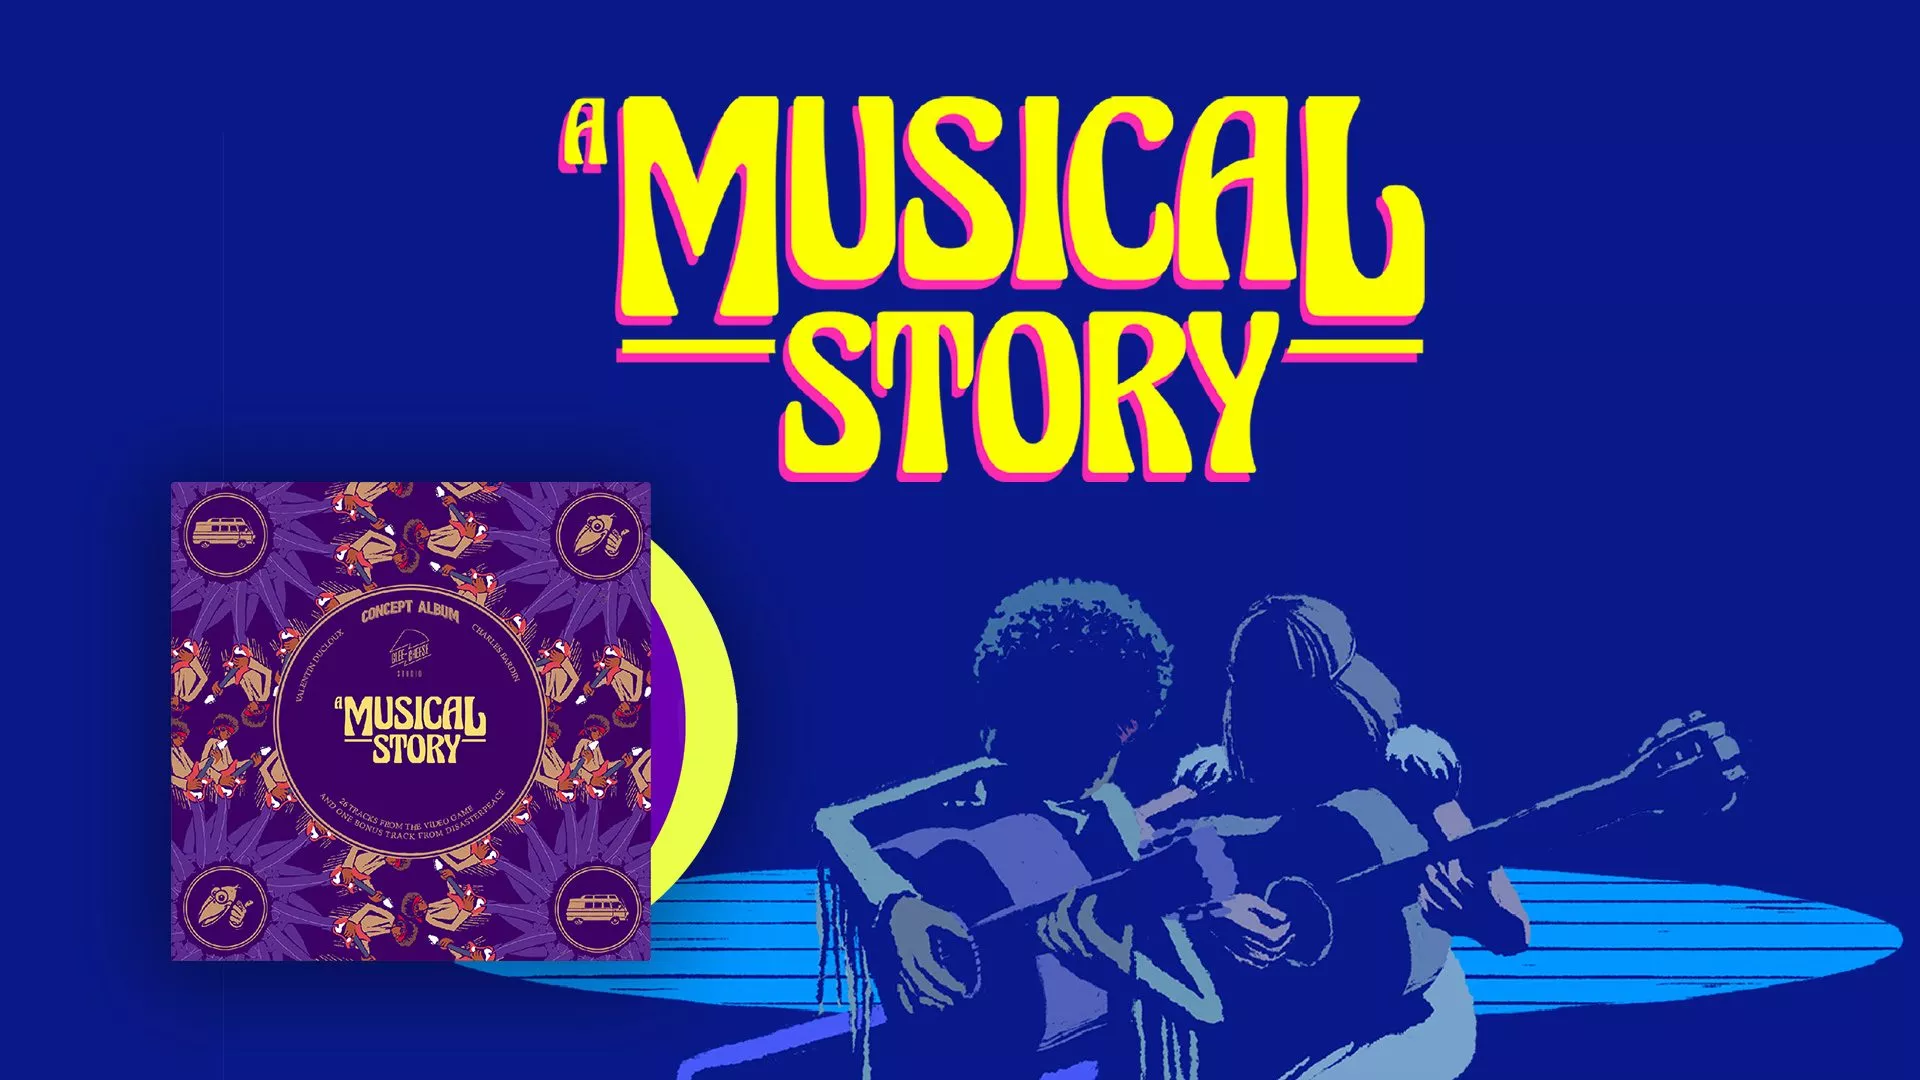 a musical story vinyle 5